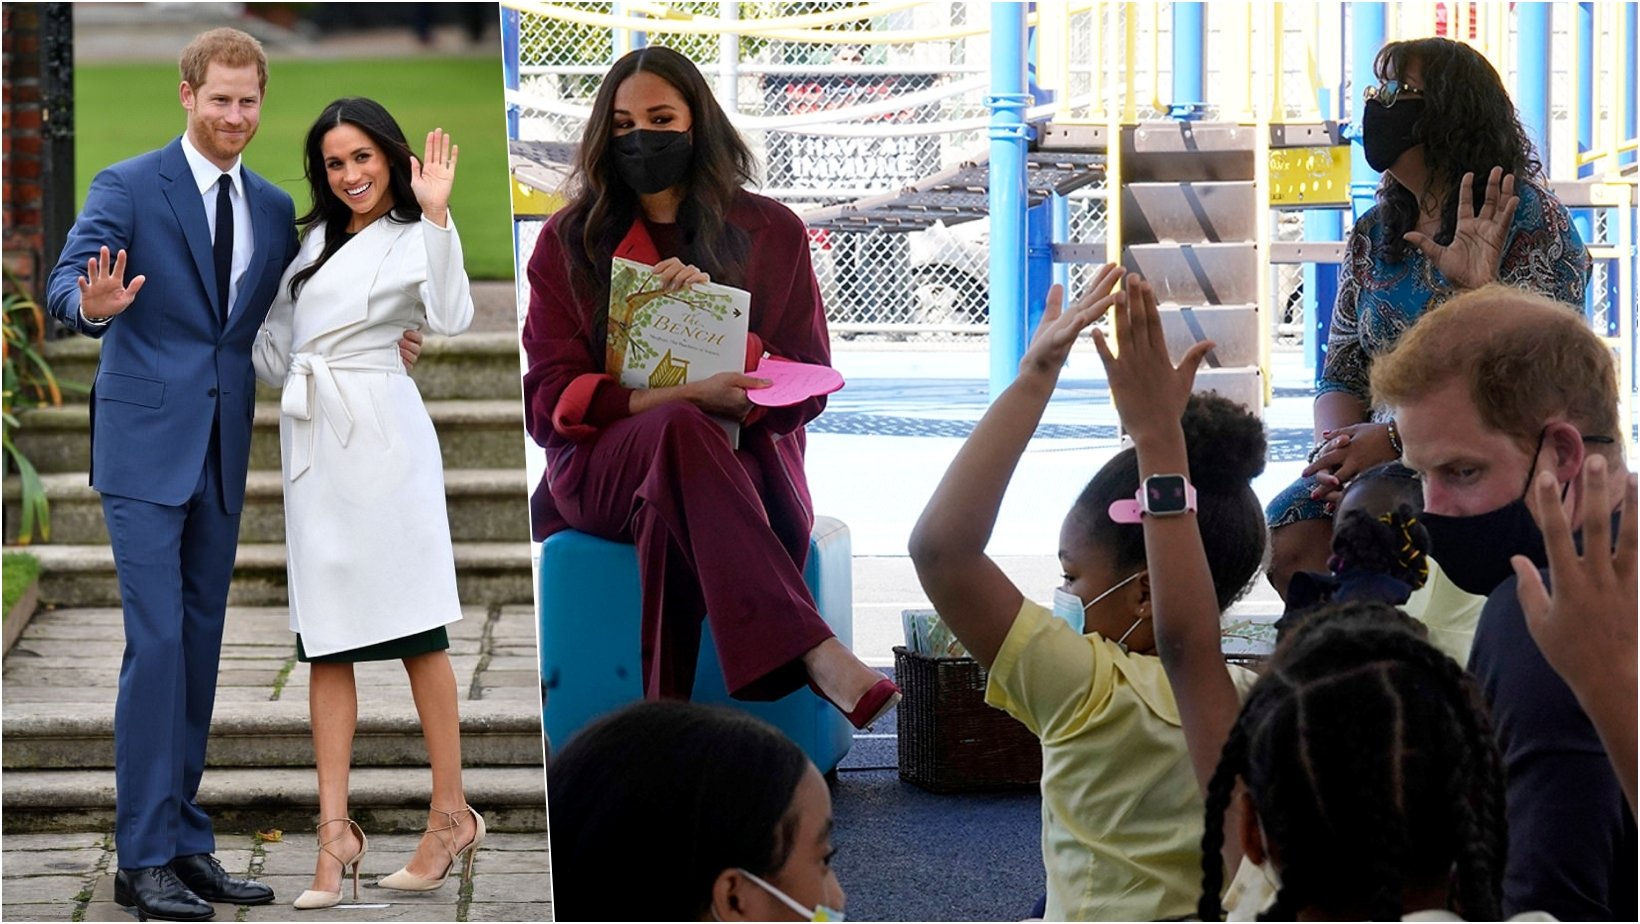 6 facebook cover 1.jpg?resize=1200,630 - Meghan Markle Reads Her Book “The Bench” To Children During A School Visit With Prince Harry